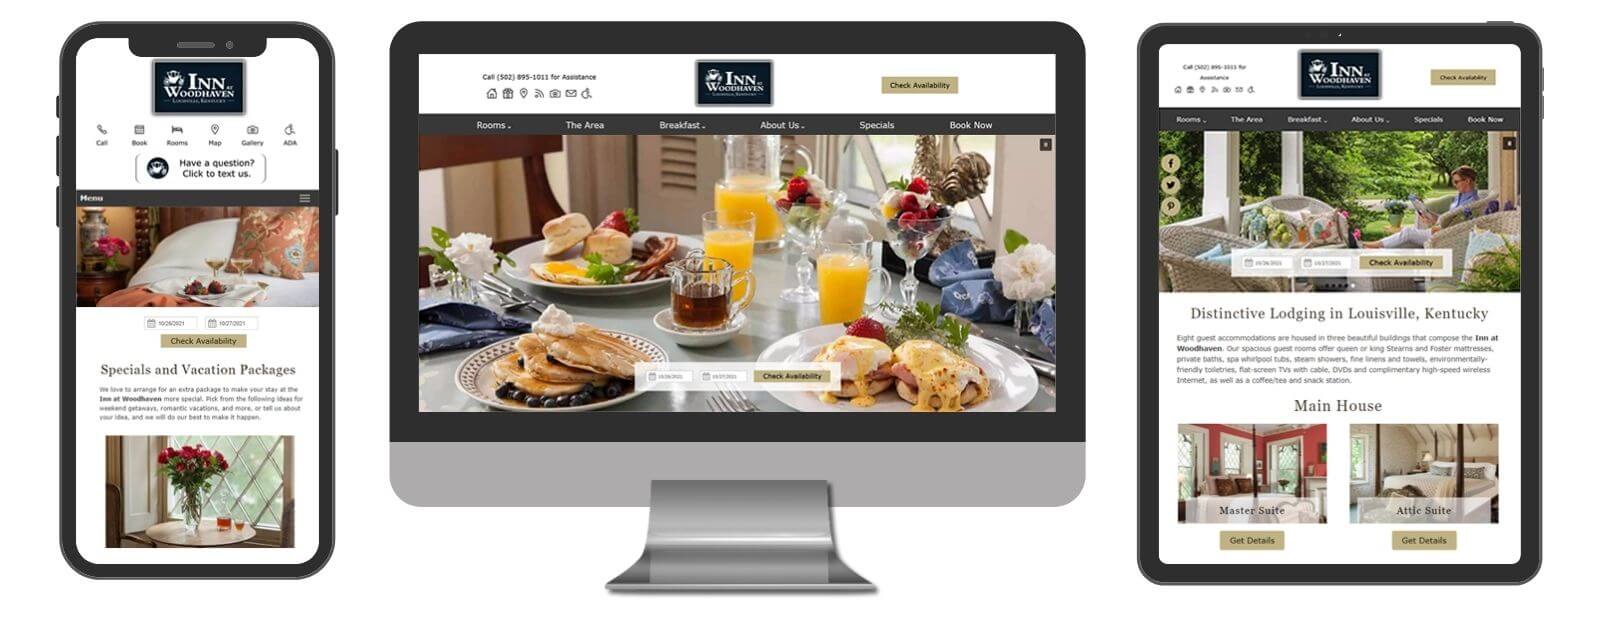 Inn at Woodhaven website displayed in 3 sizes - mobile, template and desktop